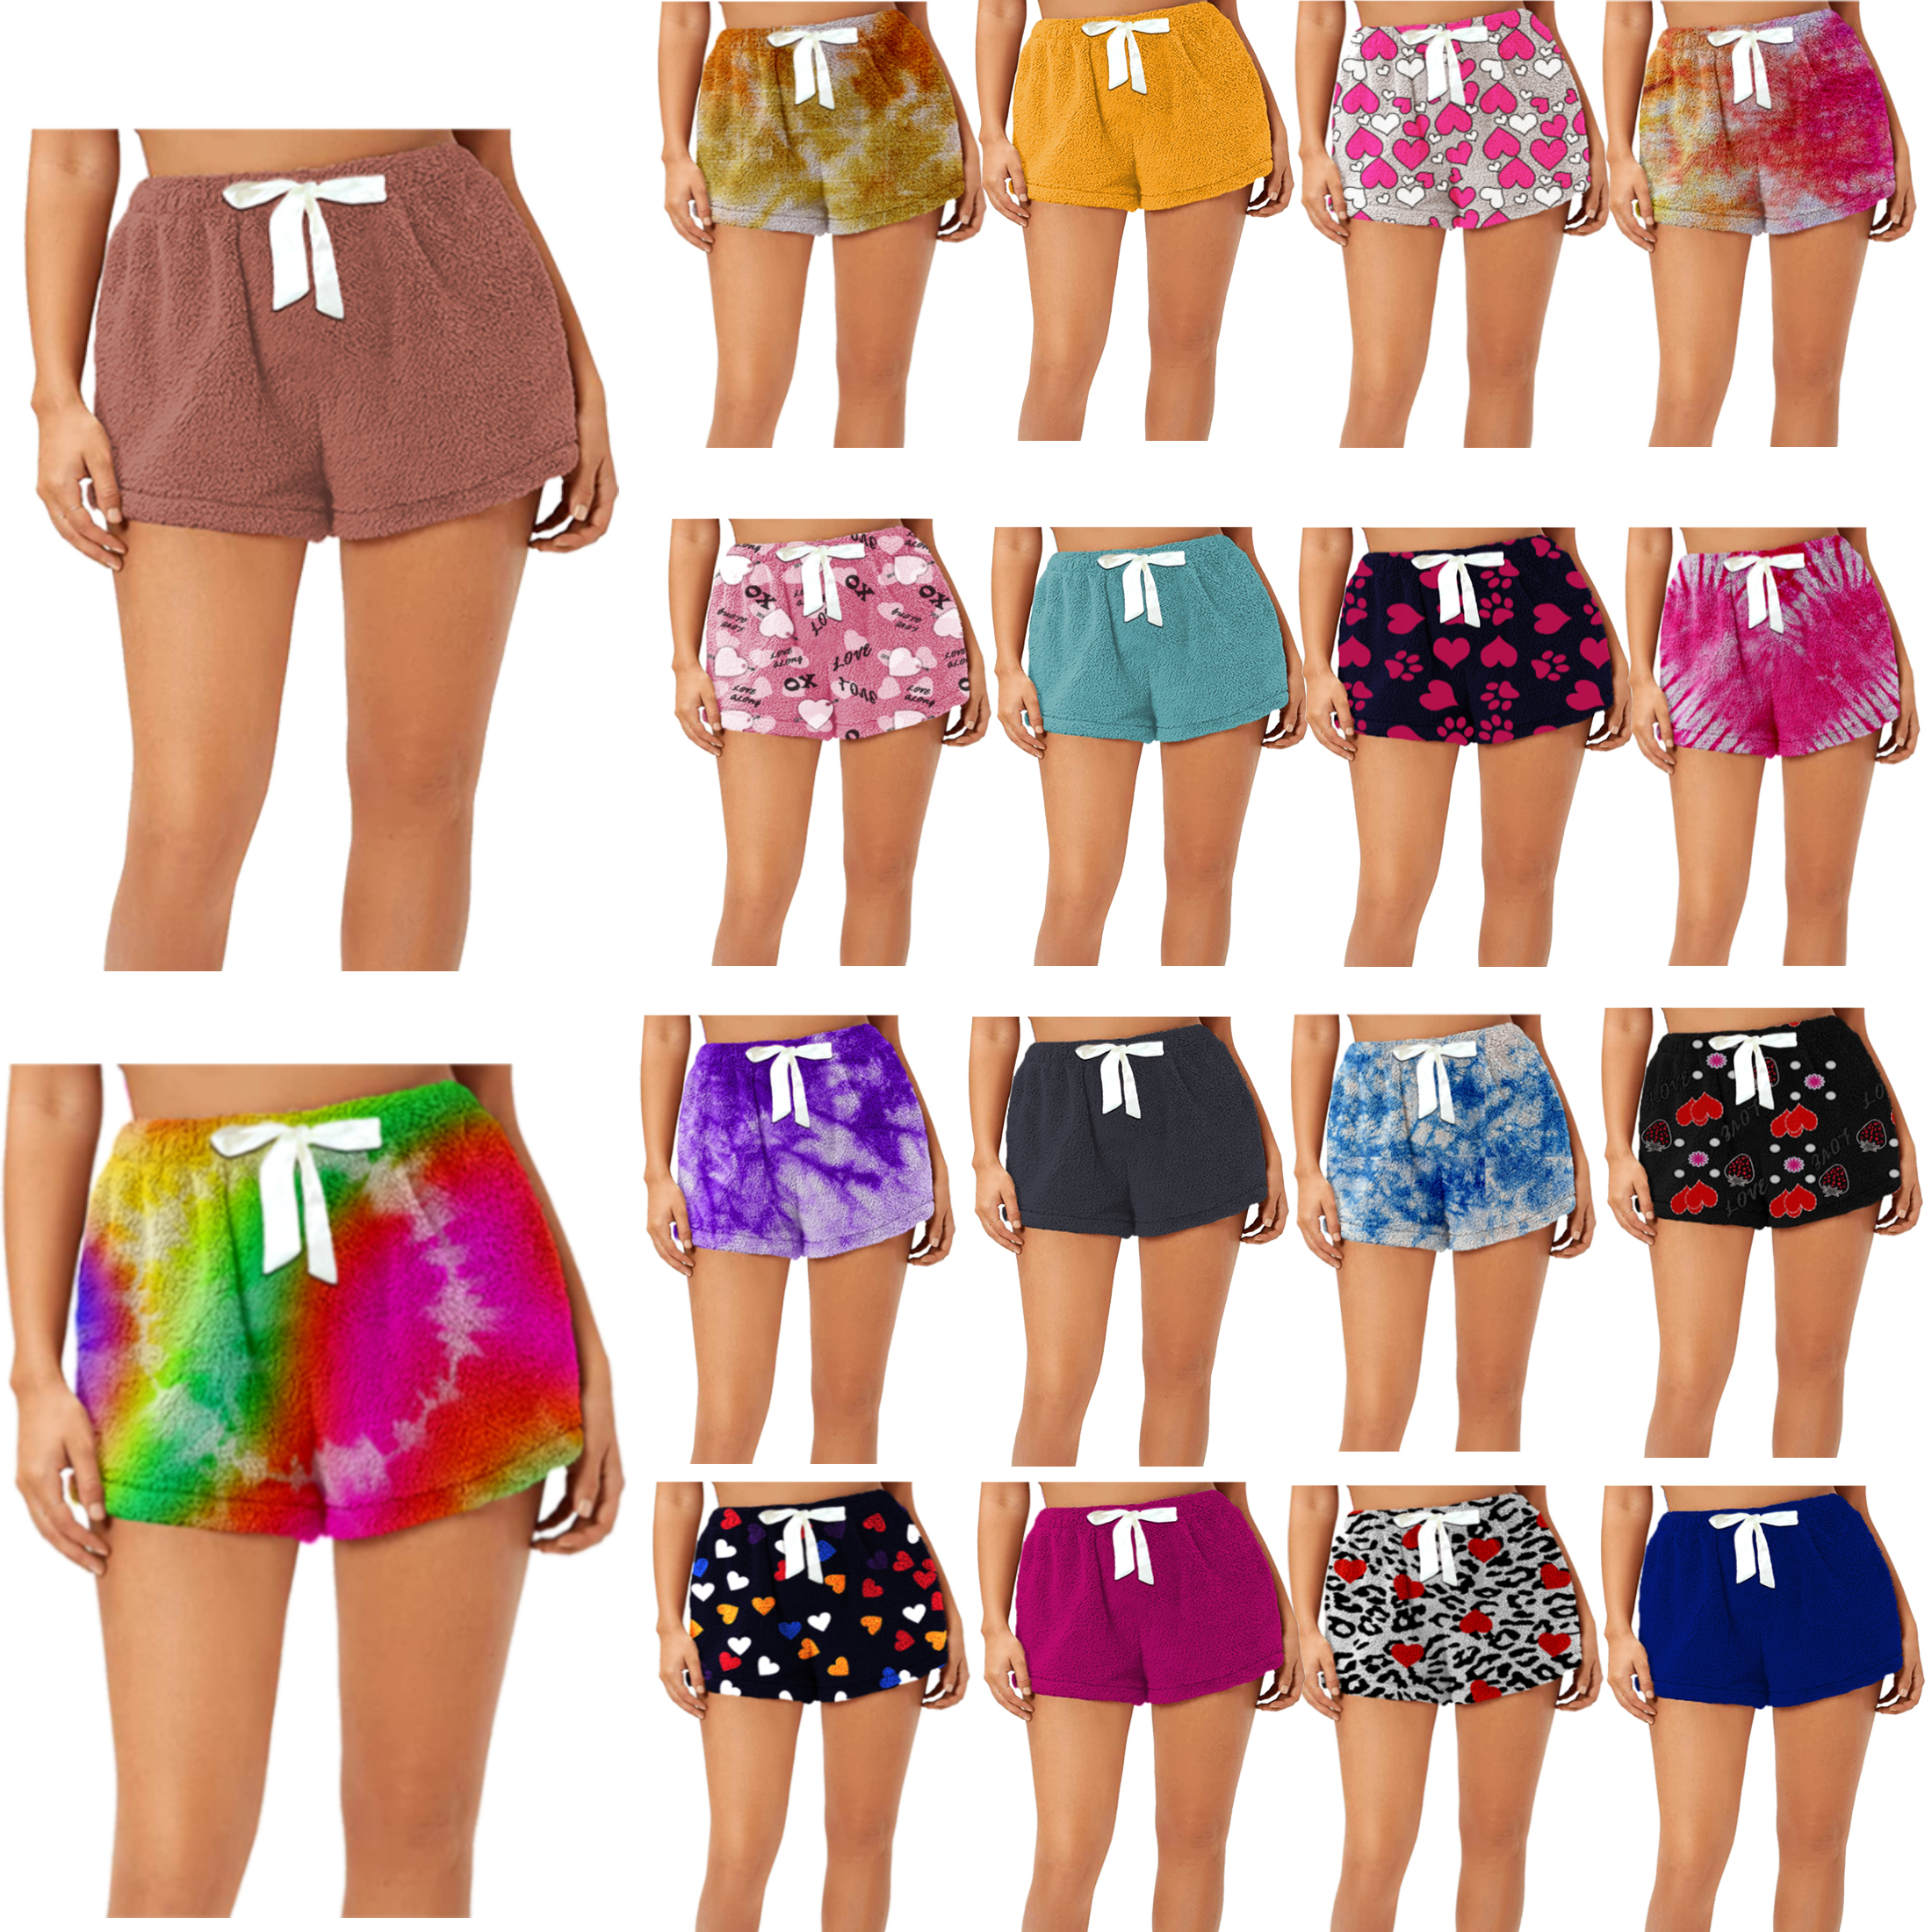 5-Pack: Women's Super Soft Micro Fleece Ultra Plush Pajama Shorts - Solid,TieDye,Solid, Small